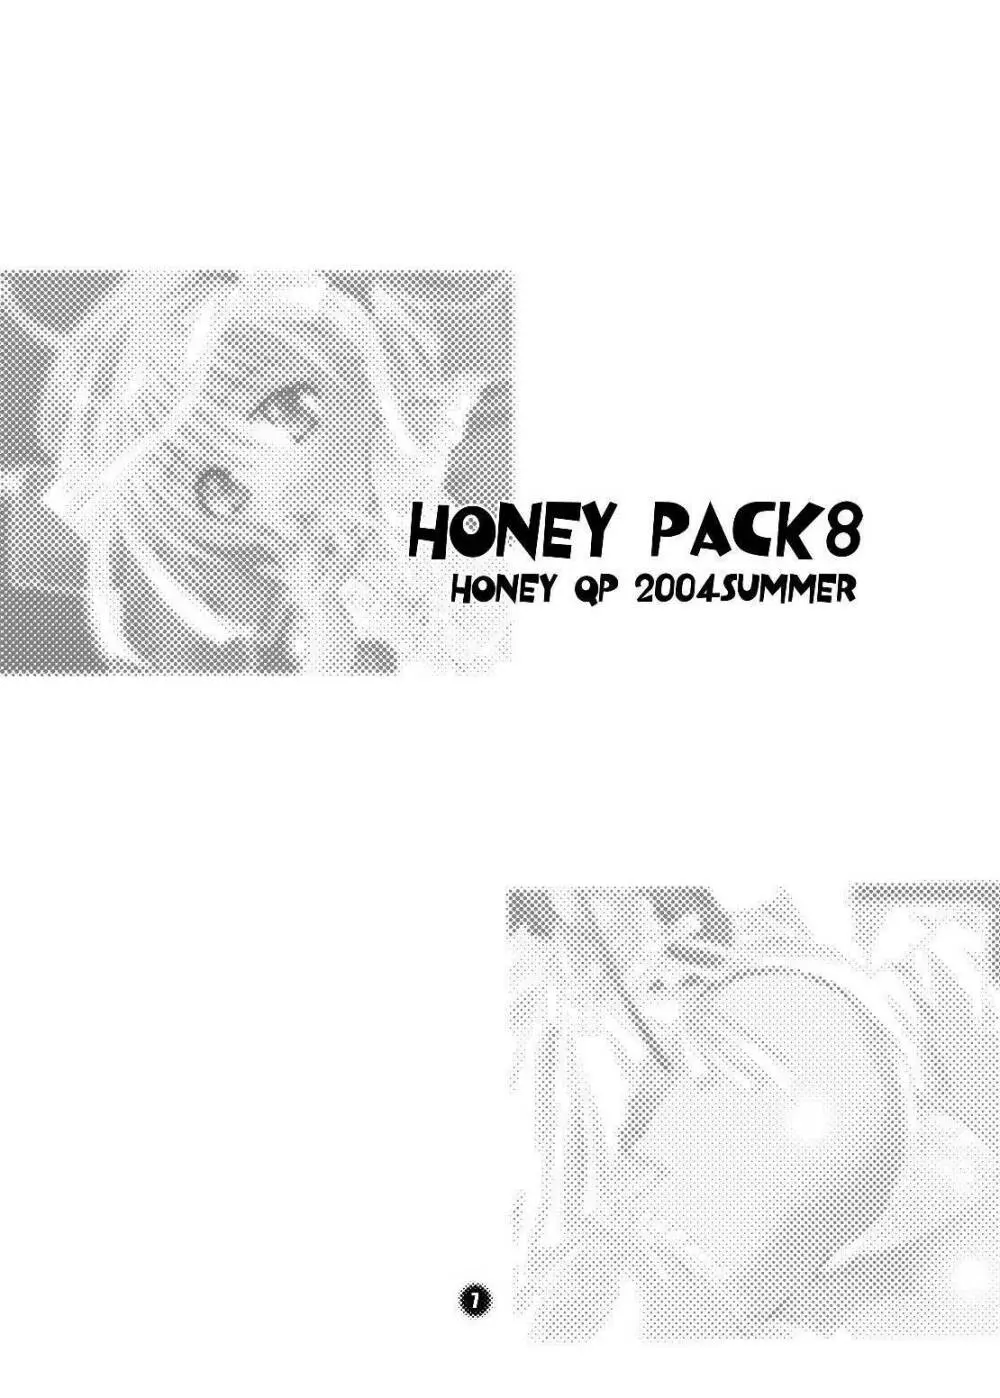 HONEY PACK 8 - page4